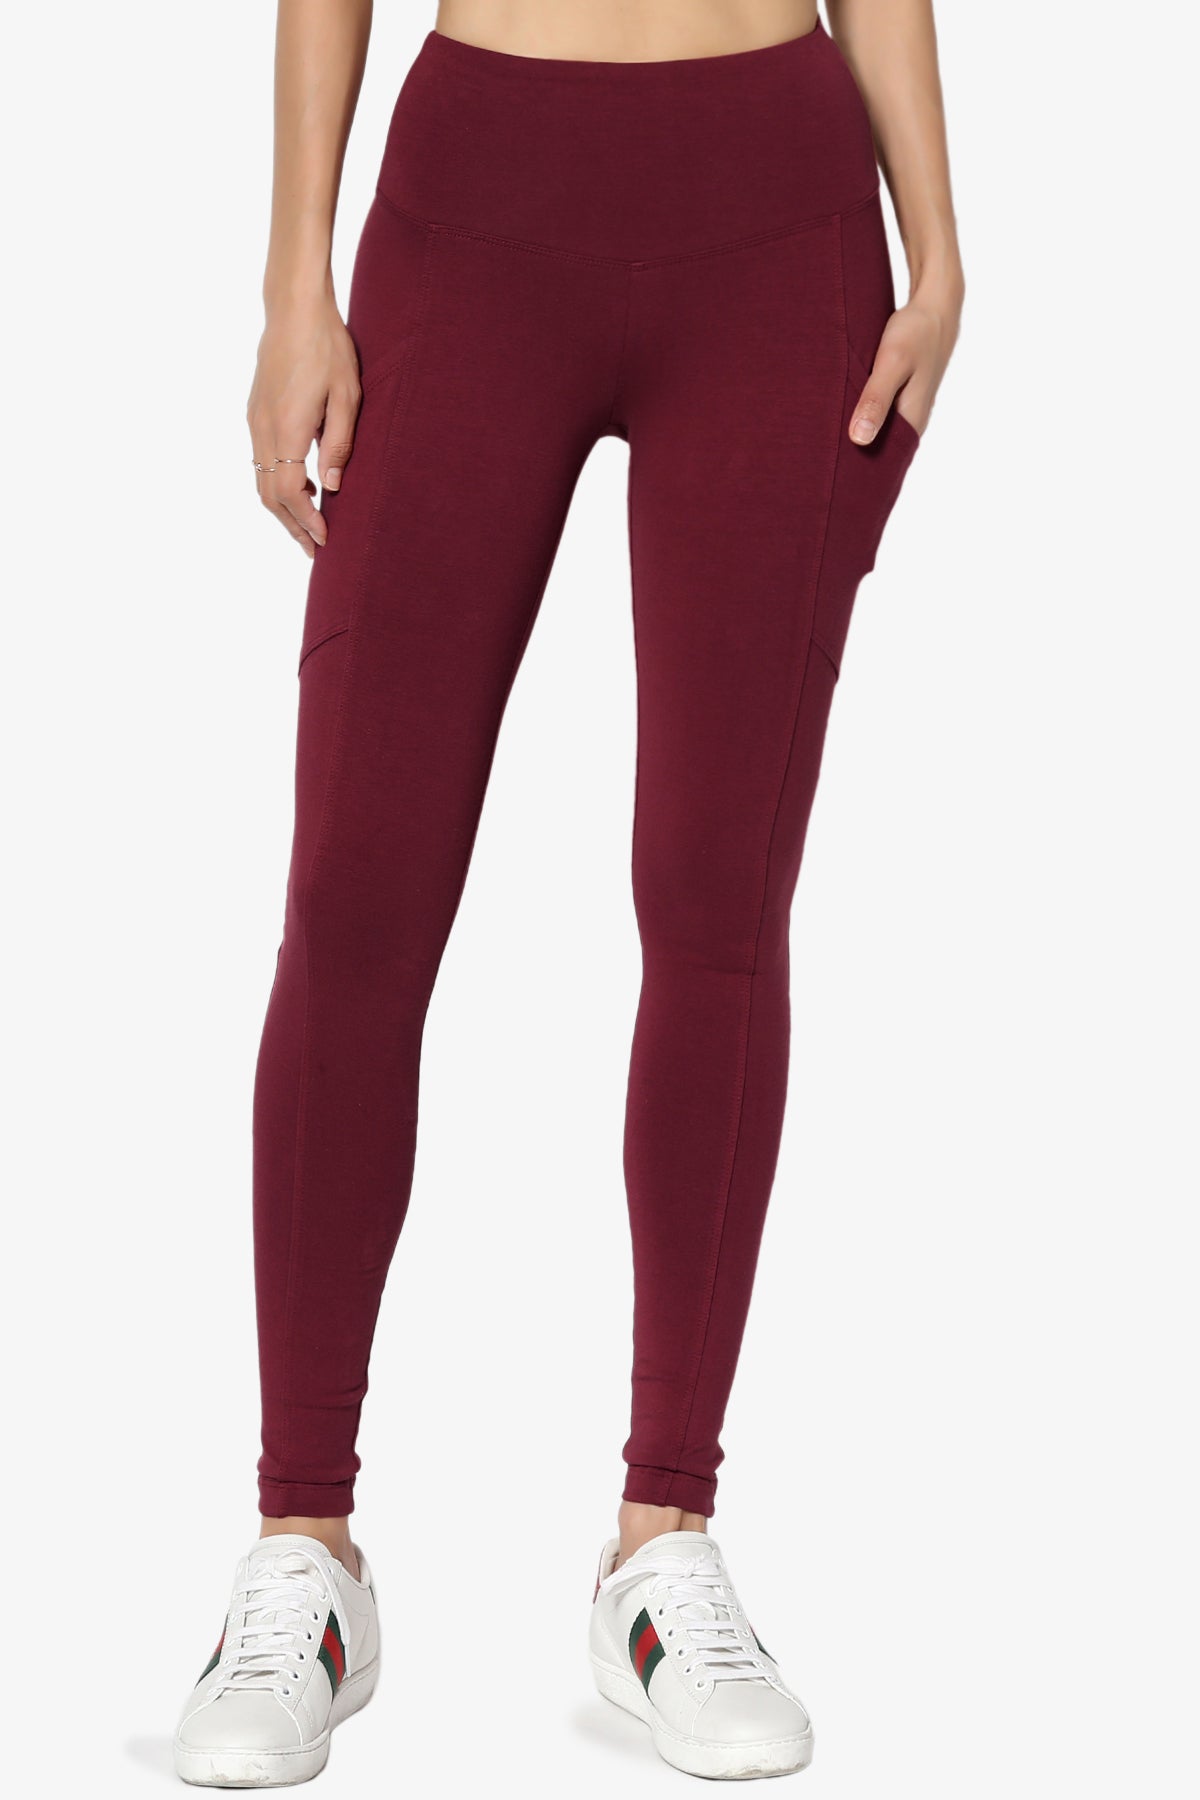 Ansley Luxe Cotton Leggings with Pockets DARK BURGUNDY_3